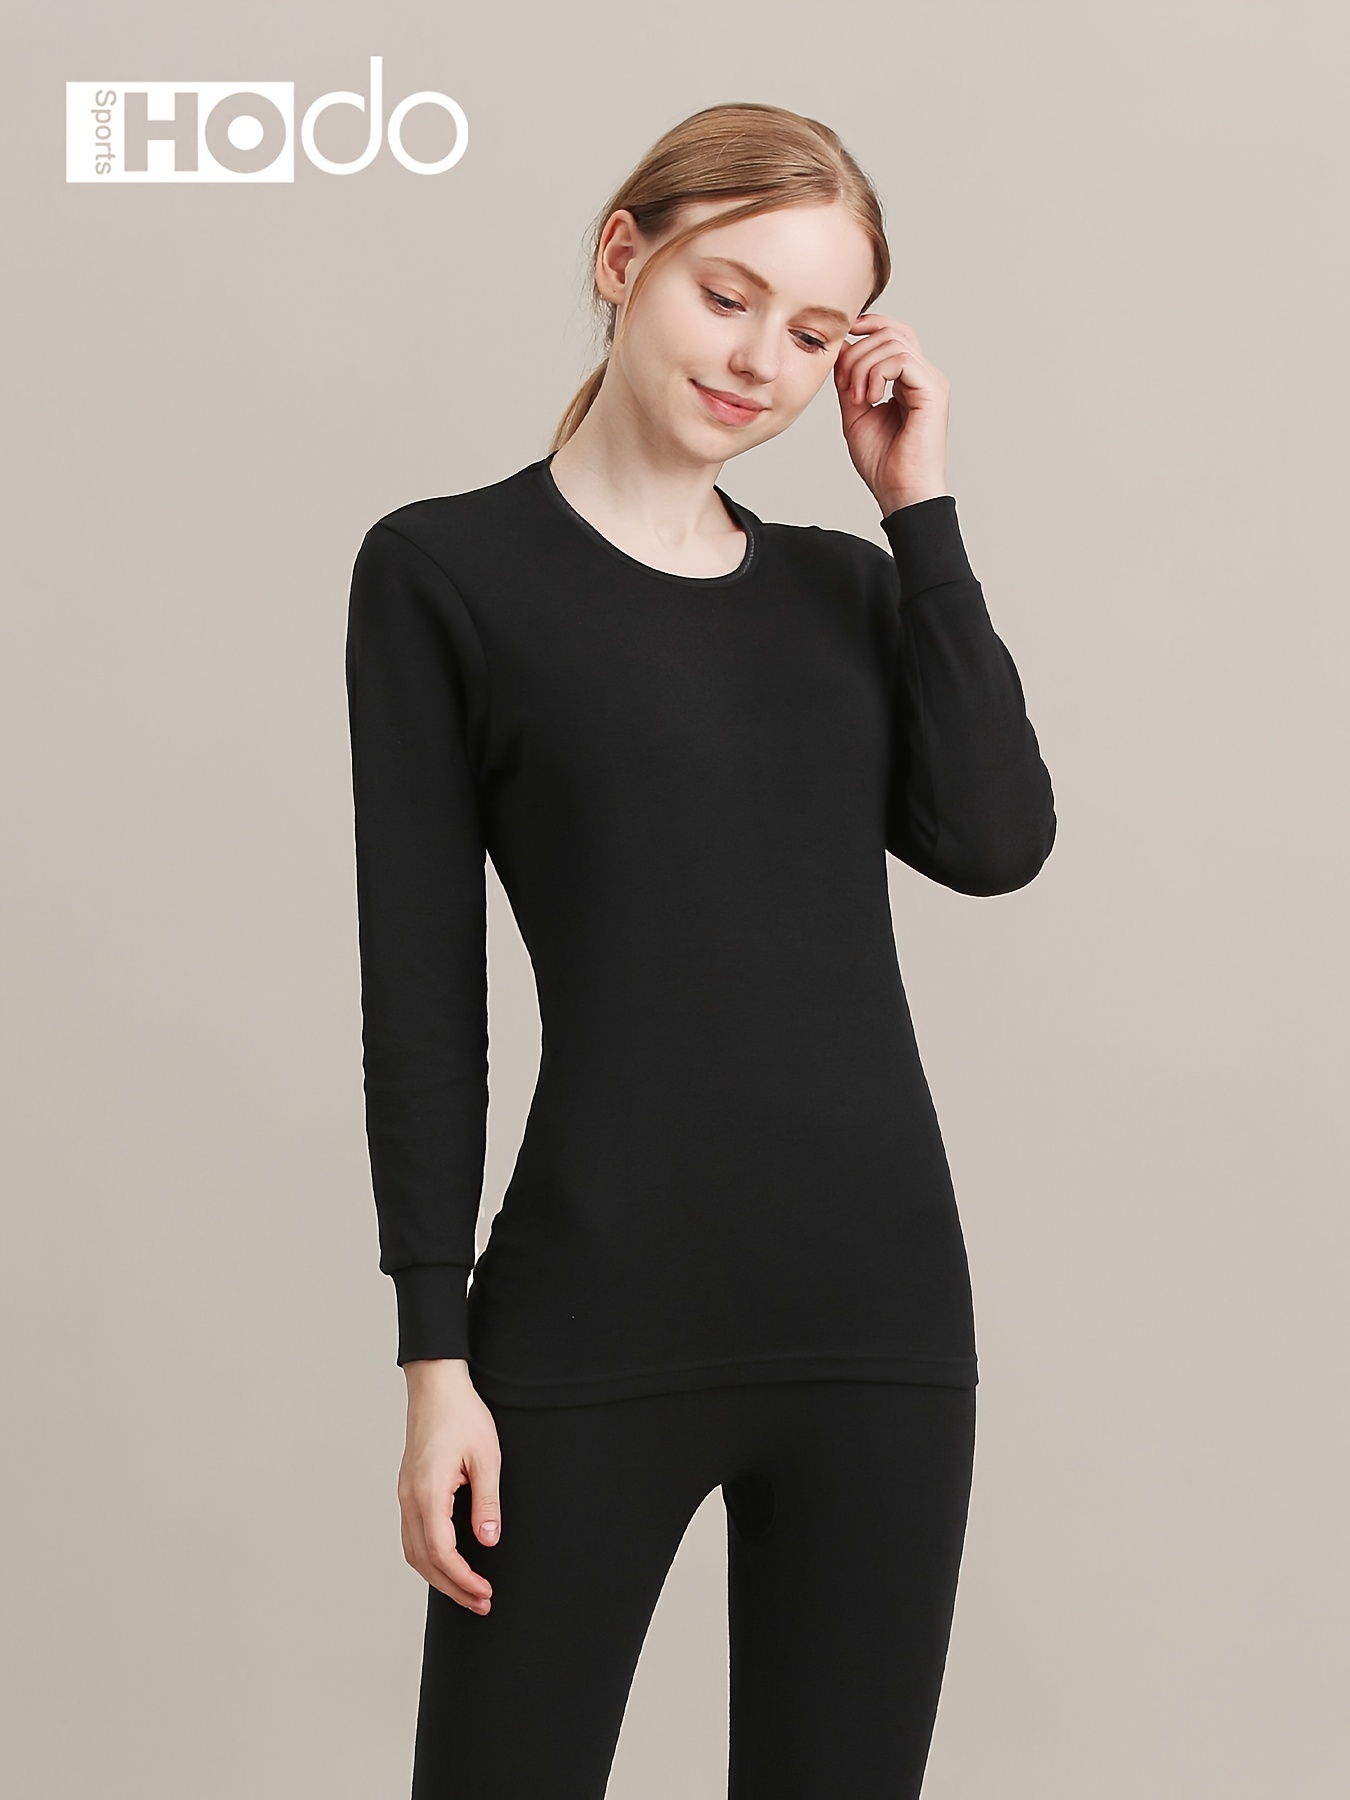 Buy online Women's Cotton Solid Thermal Set from winter wear for Women by  Tt for ₹749 at 20% off